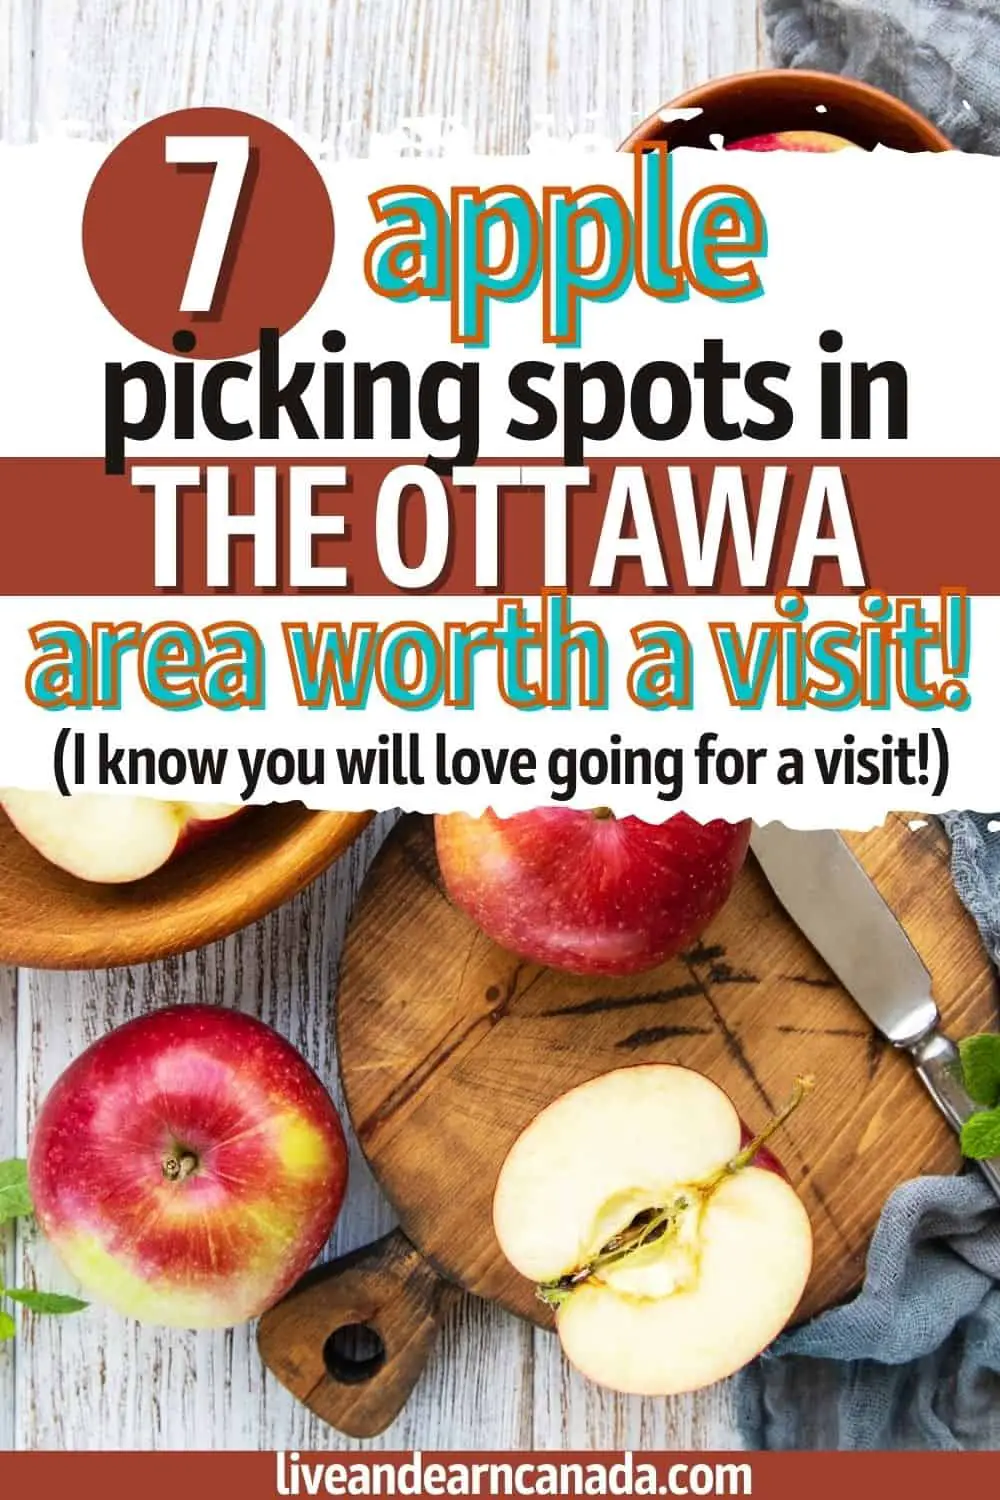 Best apple picking in Ottawa. If you are considering going Apple picking this year, we have a list of some of the best apple picking orchards in Ottawa worth visiting this year.